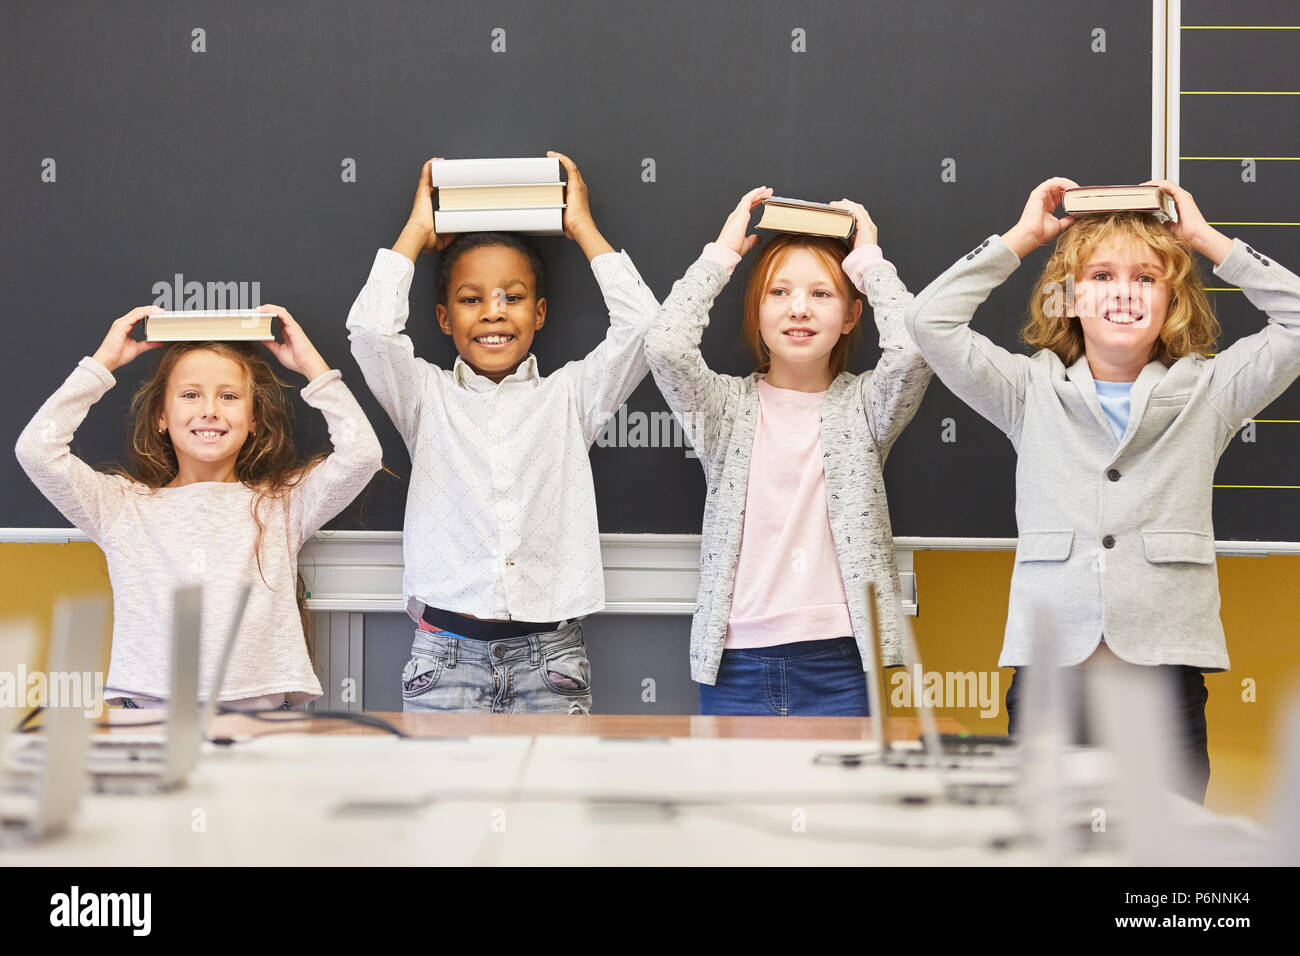 Group of children in elementary school make mischief with books on their heads Stock Photo